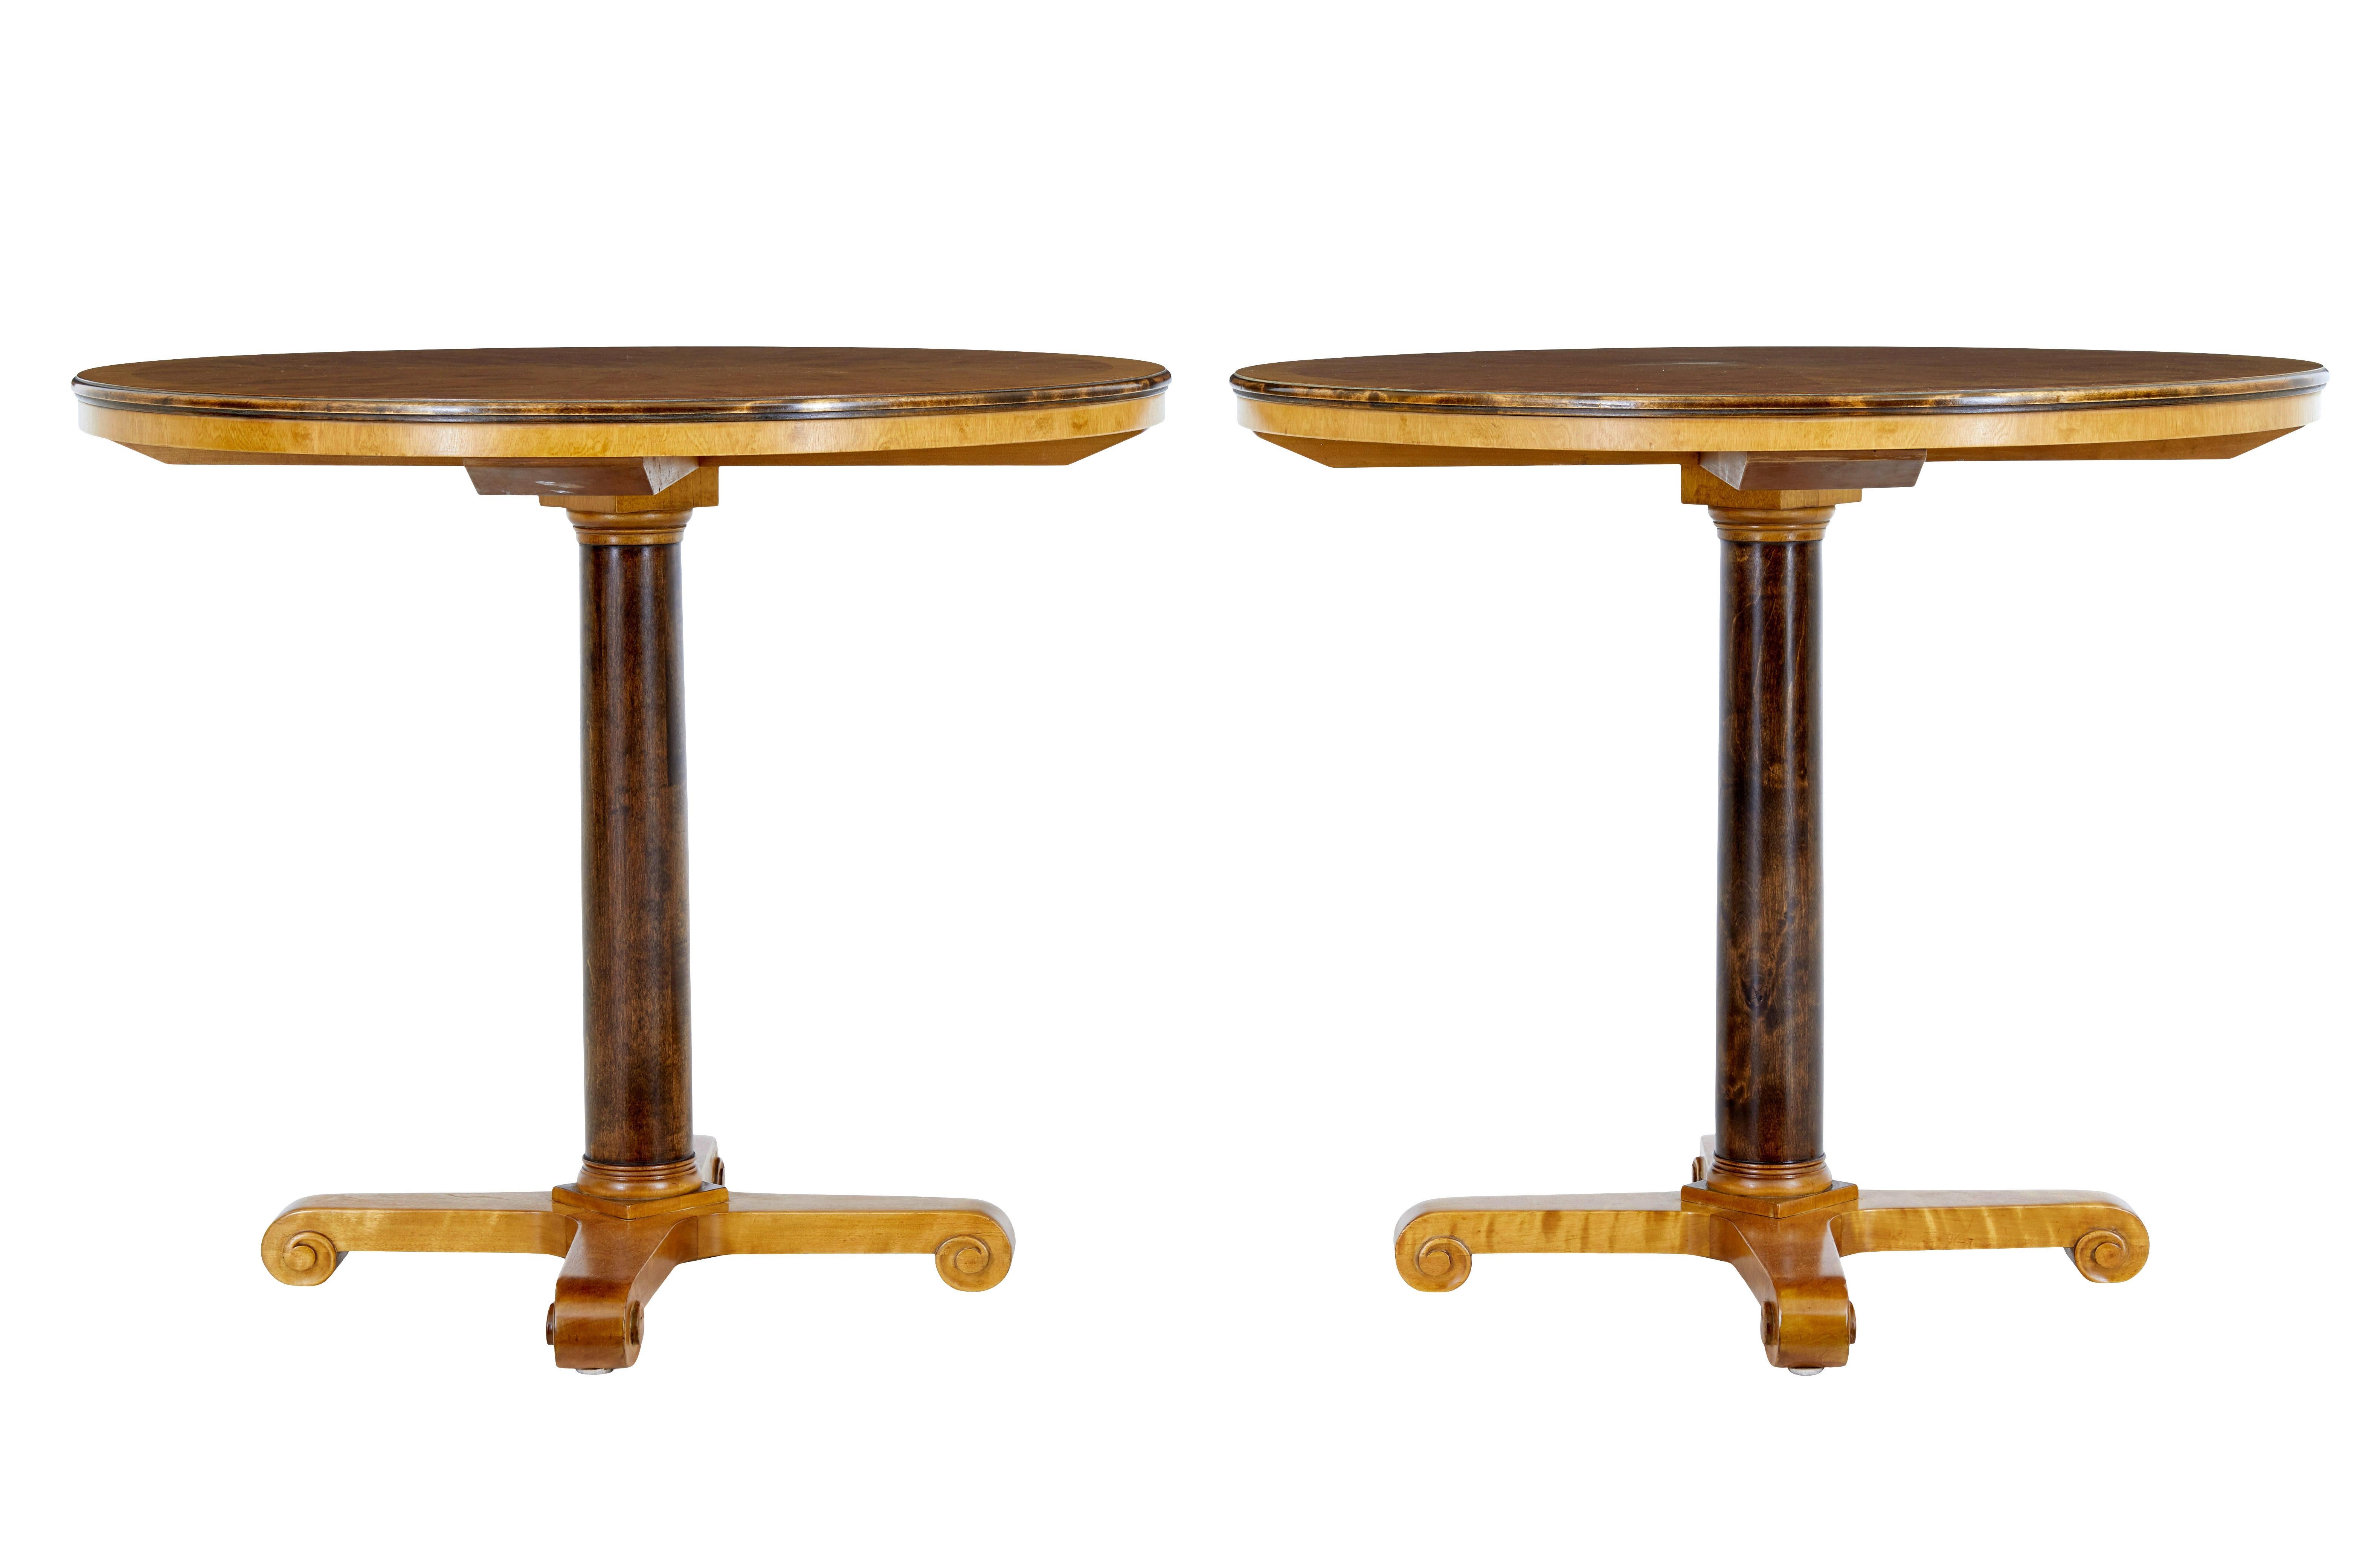 Pair of mid century birch tables by nordiska kompaniet circa 1940.

Superb quality pair of tables by well re-nowned swedish maker's and retailers a.B nordiska kompaniet.

Circular tops with quarter segment veneered top, cross banded with a darker